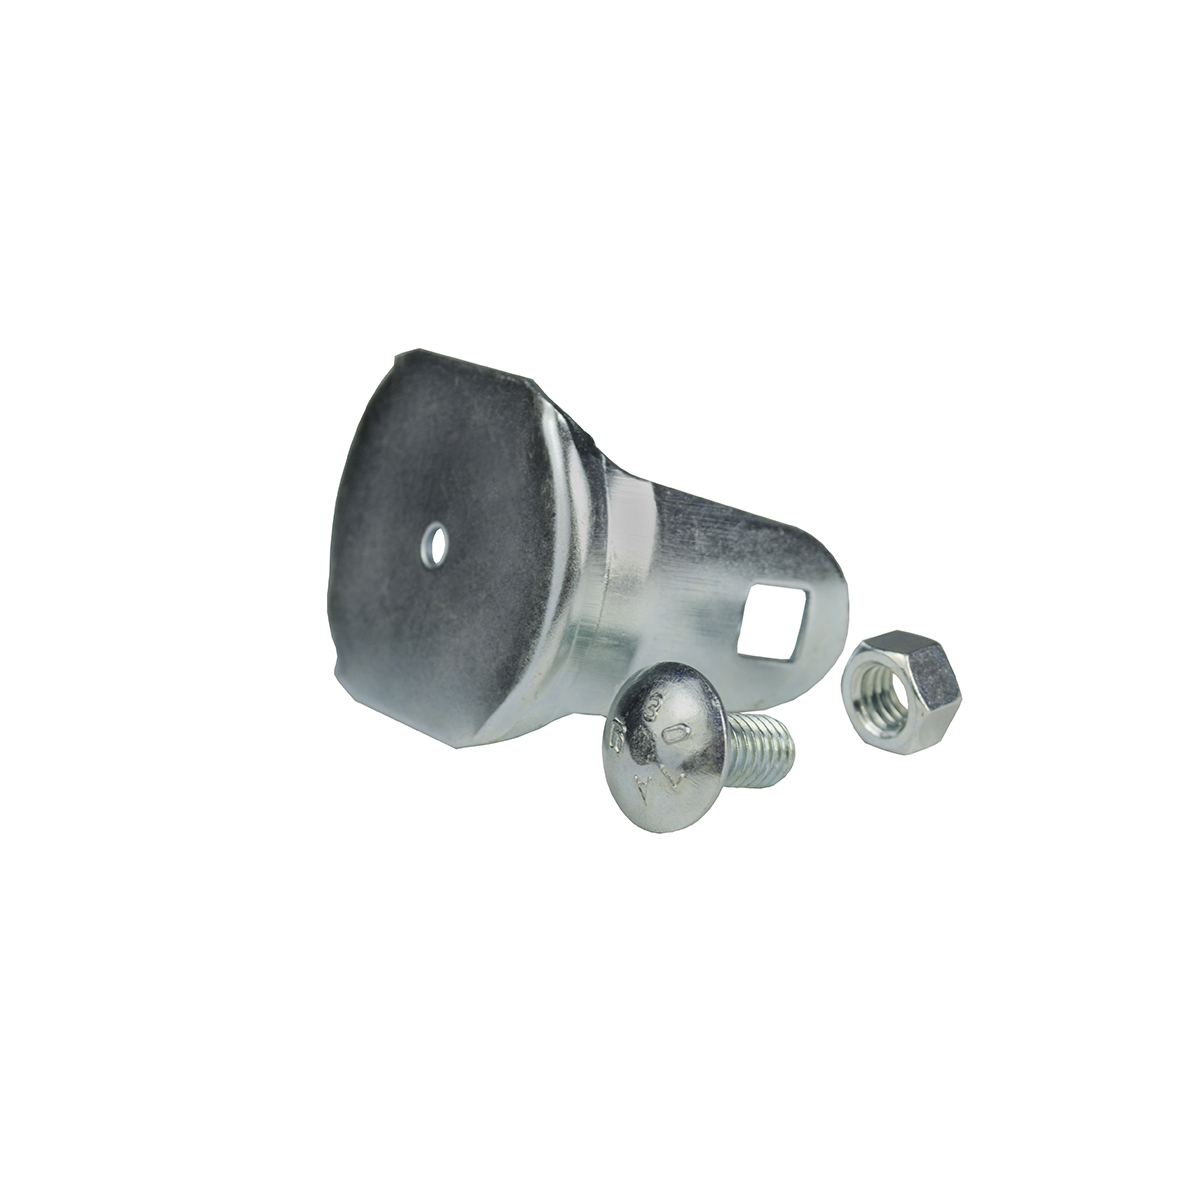 Cannonball Round Track End Cap